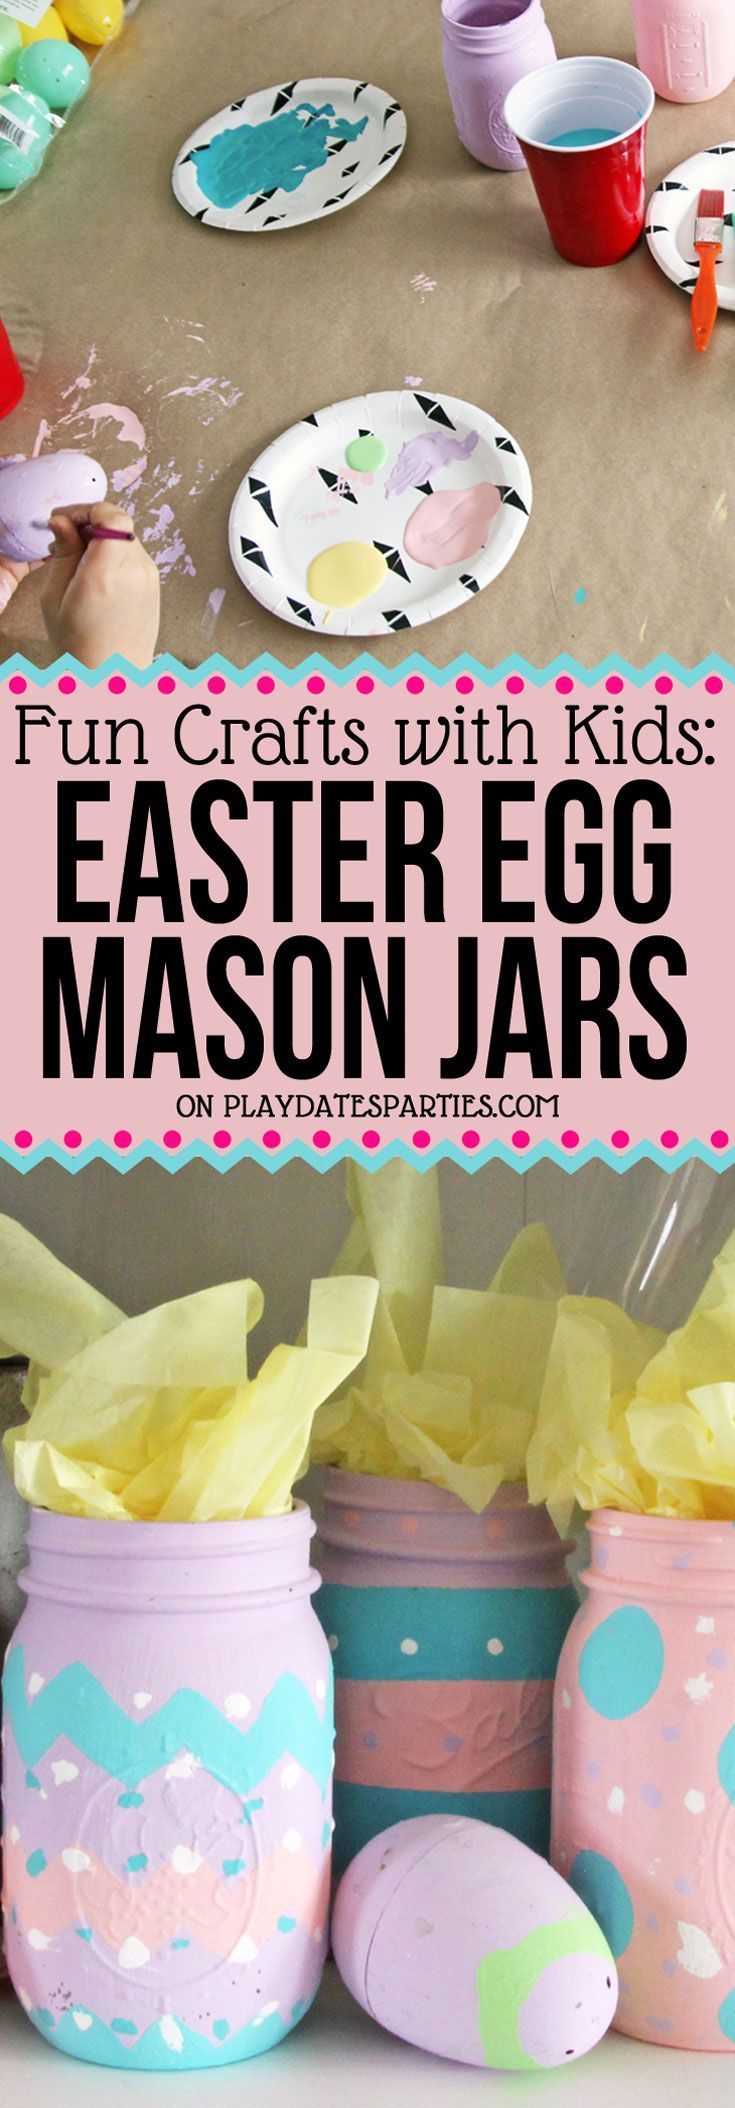 How to Make Adorable Easter Egg Mason Jars (Fun for Kids too!) -   25 kids crafts easter ideas